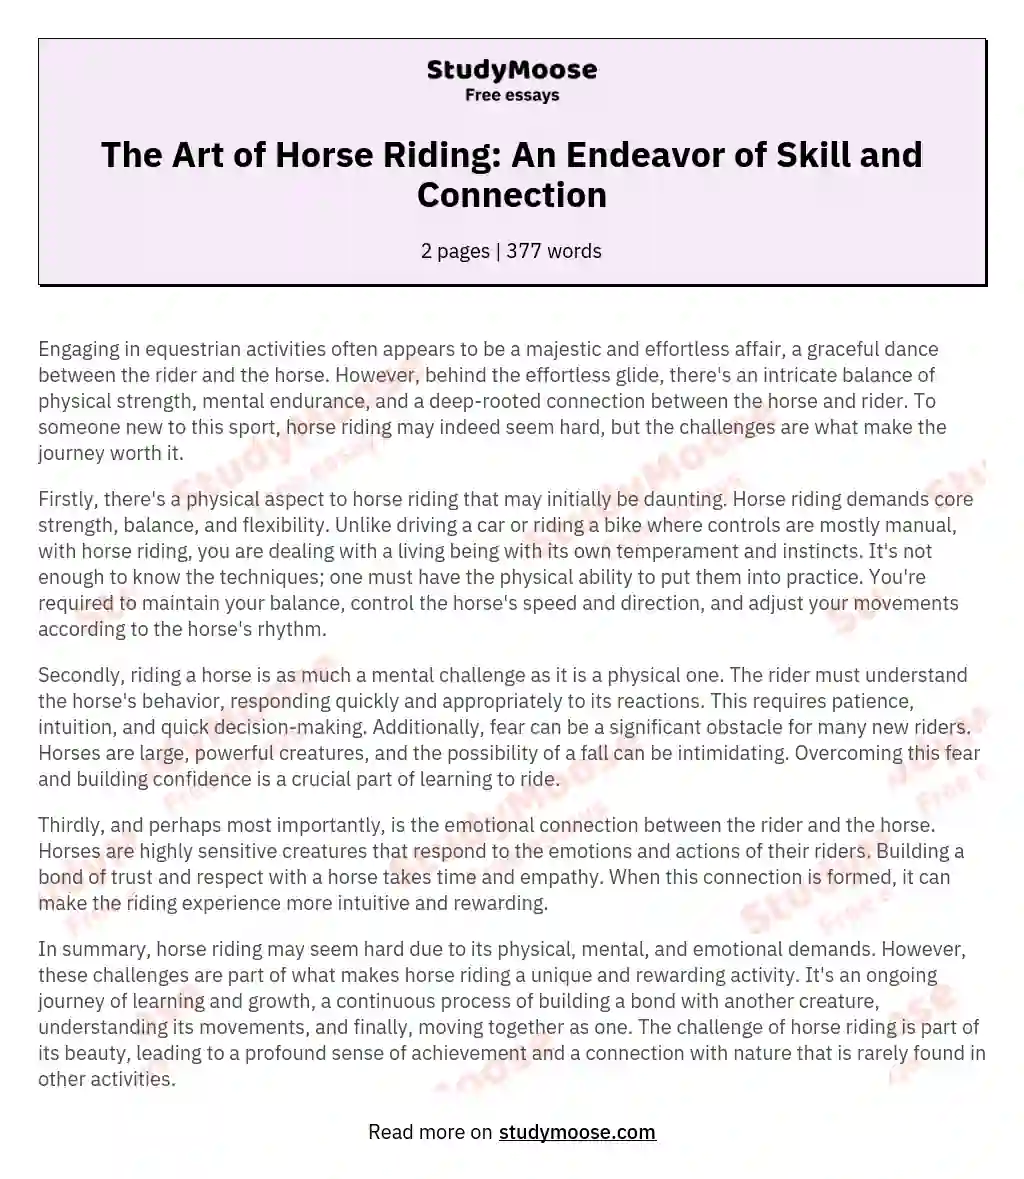 The Art of Horse Riding: An Endeavor of Skill and Connection essay